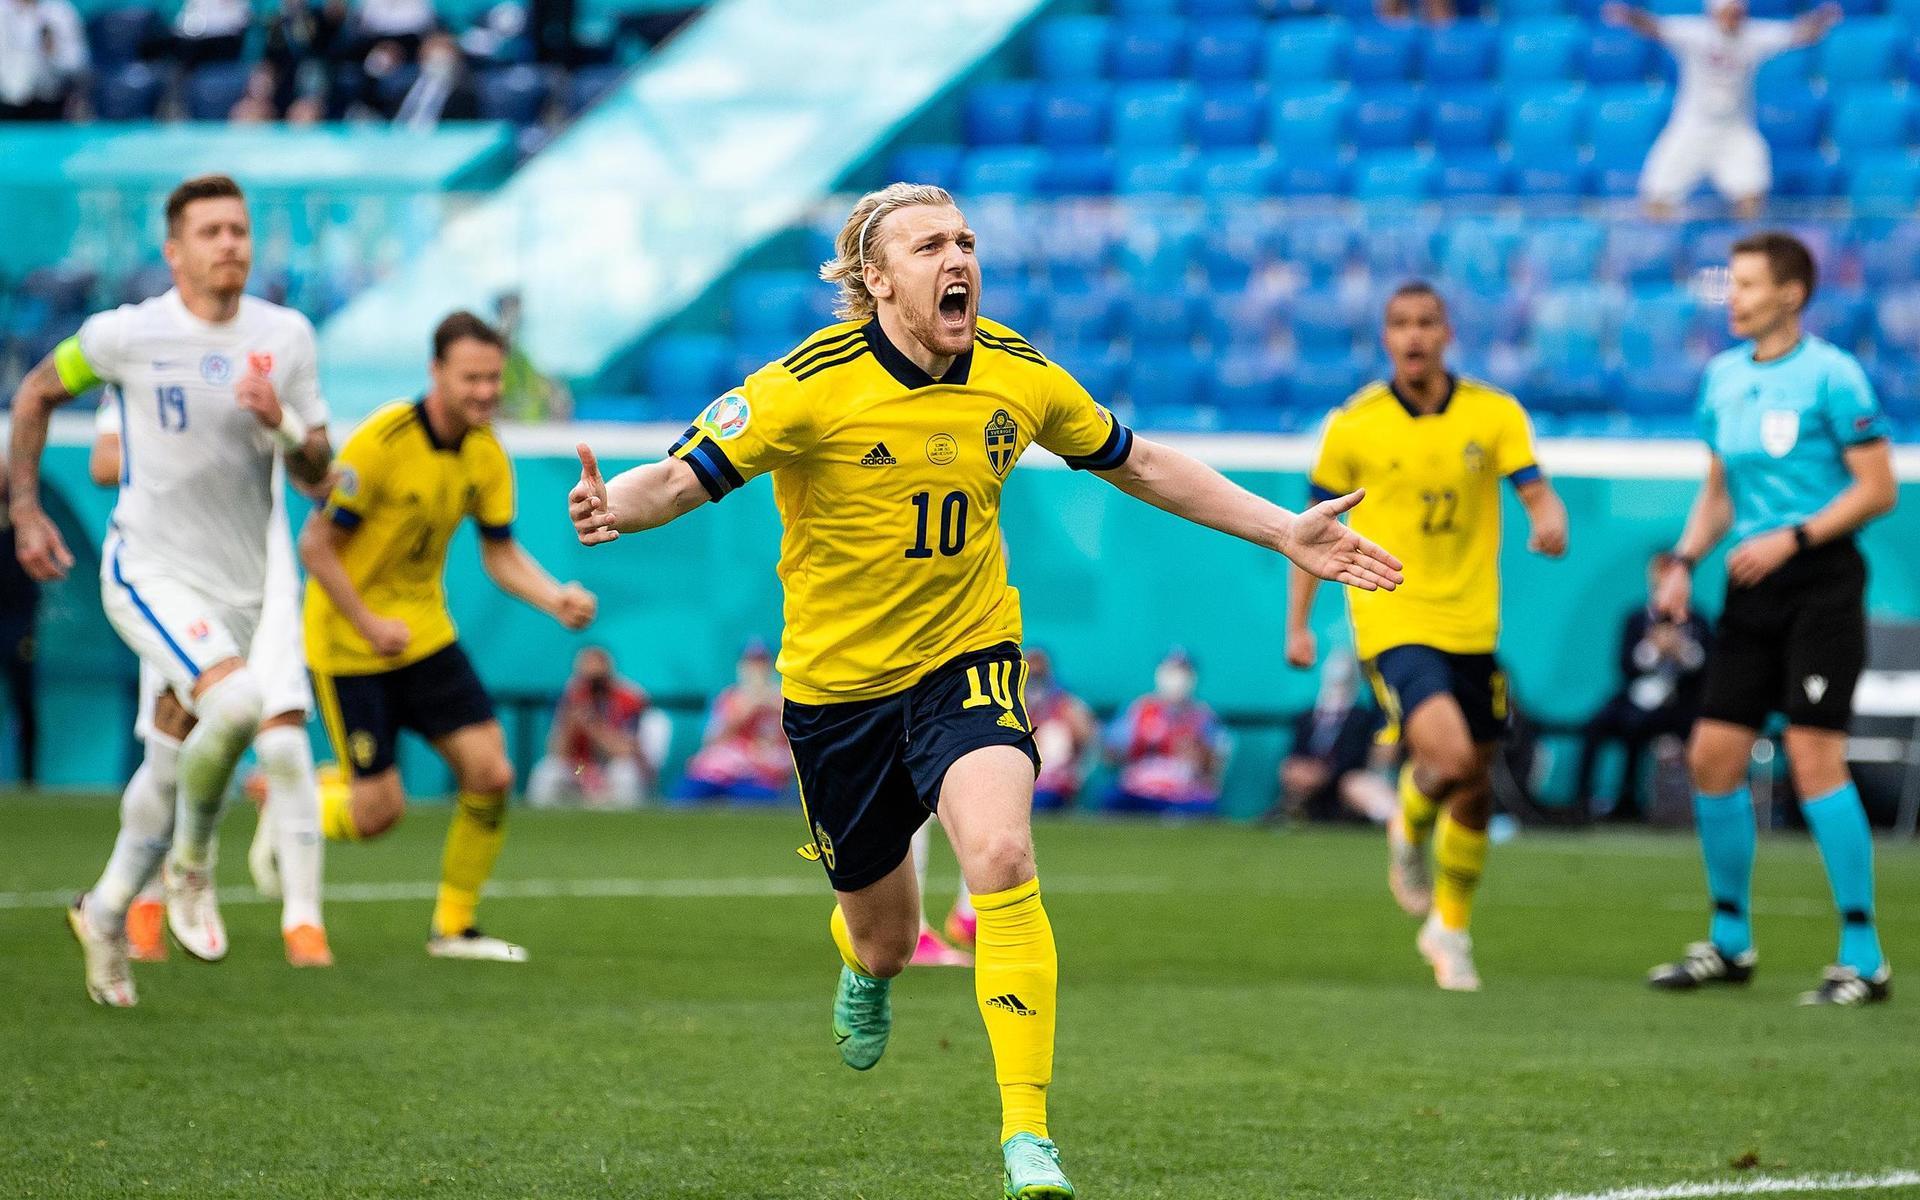 Emil Forsberg of Sweden celebrates after scoring 1-0 during the UEFA Euro 2020 Football Championship match between Sweden and Slovakia on June 18, 2021 in Saint Petersburg. 